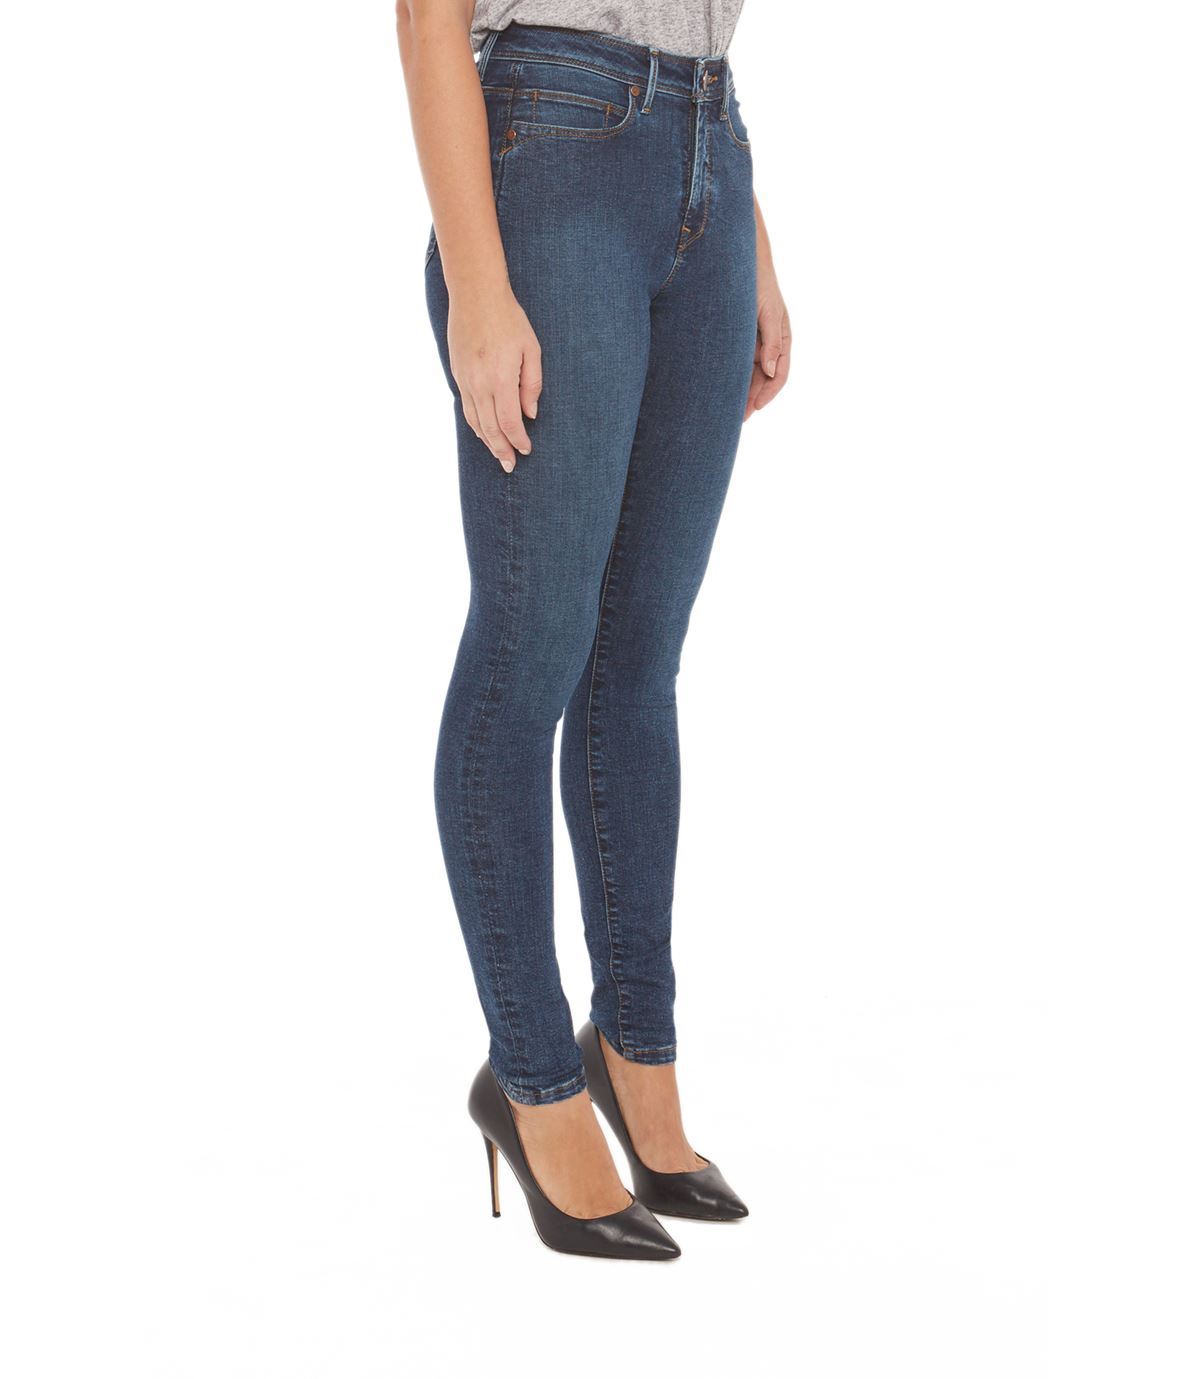 Alexa High Rise Skinny Jeans in Cool Starry Night-Apparel-Lemons and Limes Boutique